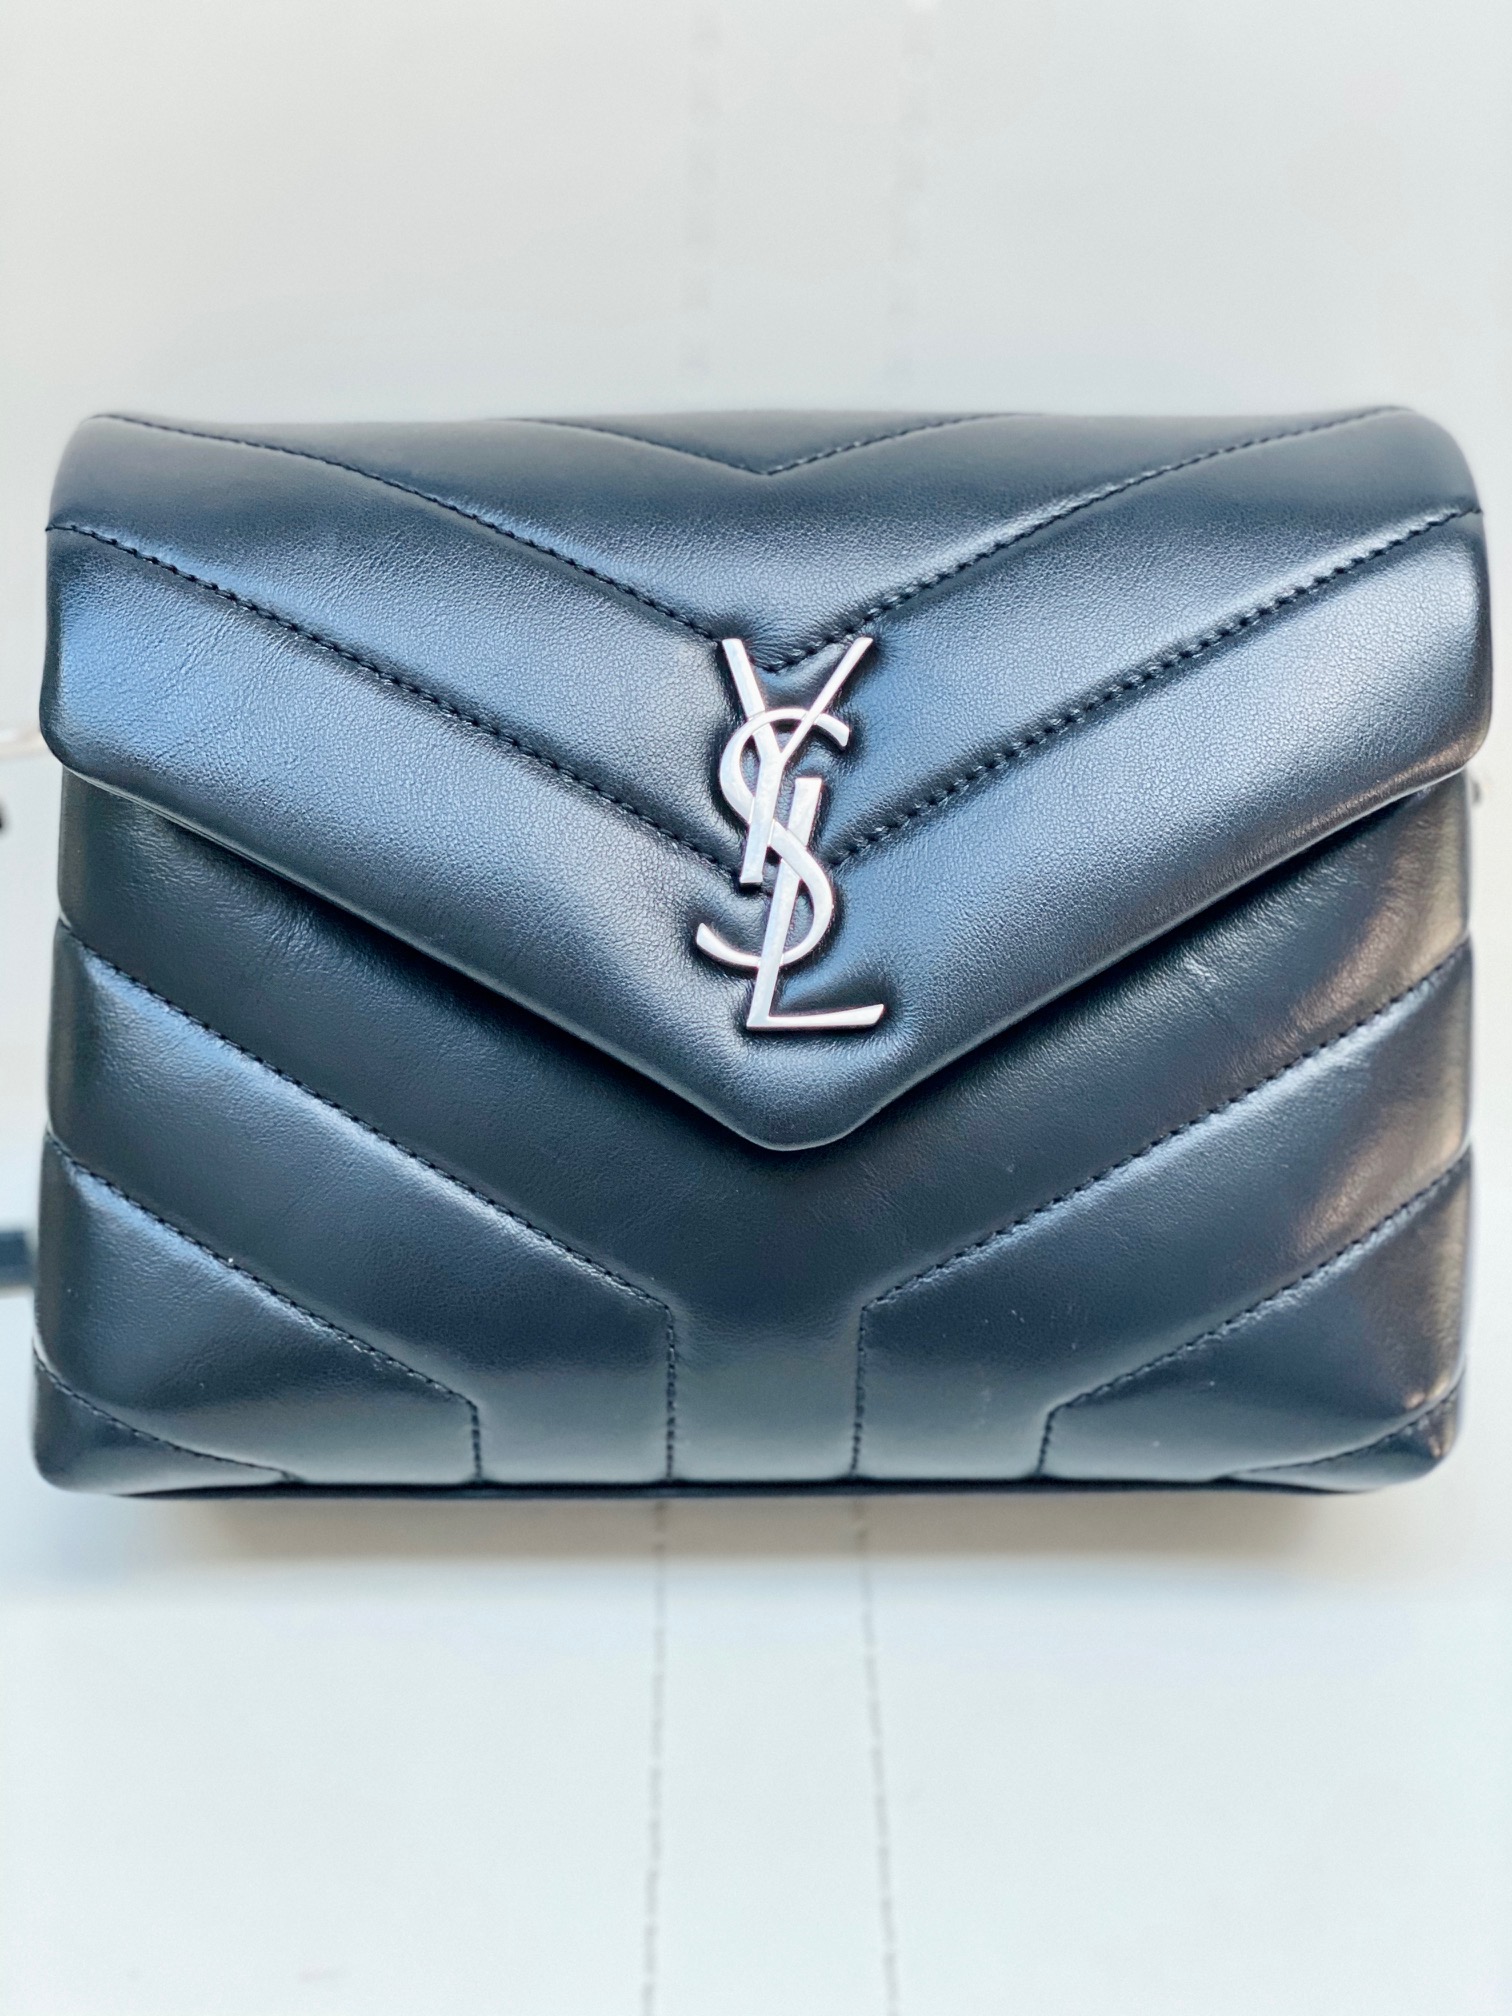 Saint Laurent Loulou Toy Bag Review – A star is born - Unwrapped